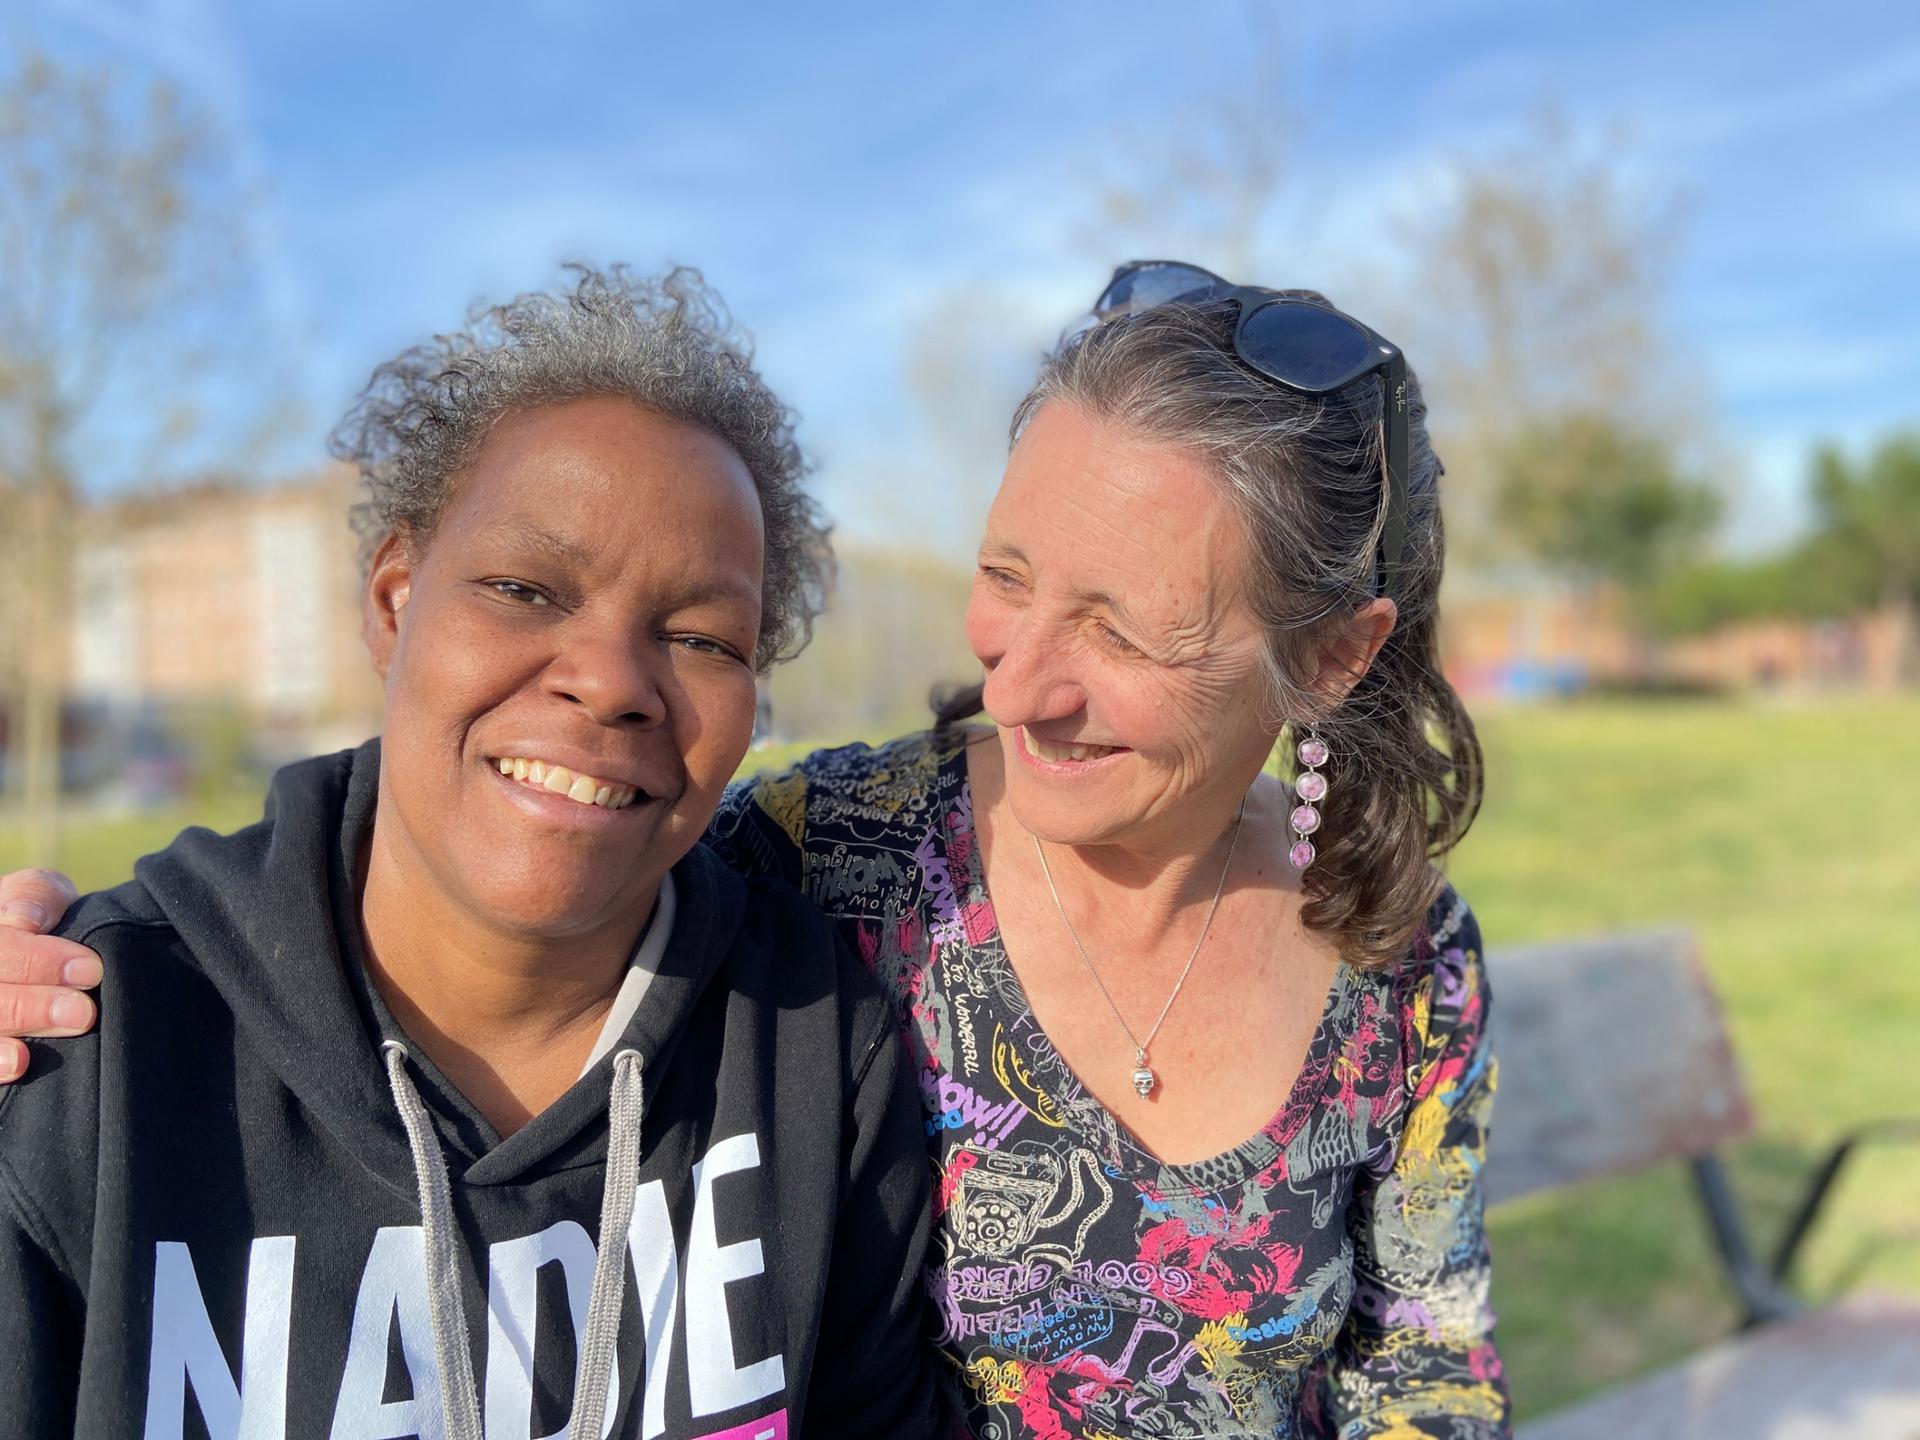 Vicky and hospice volunteer Soledad Gallego get together every few days to chat about life and, on occasion, death. Vicky has terminal cancer.